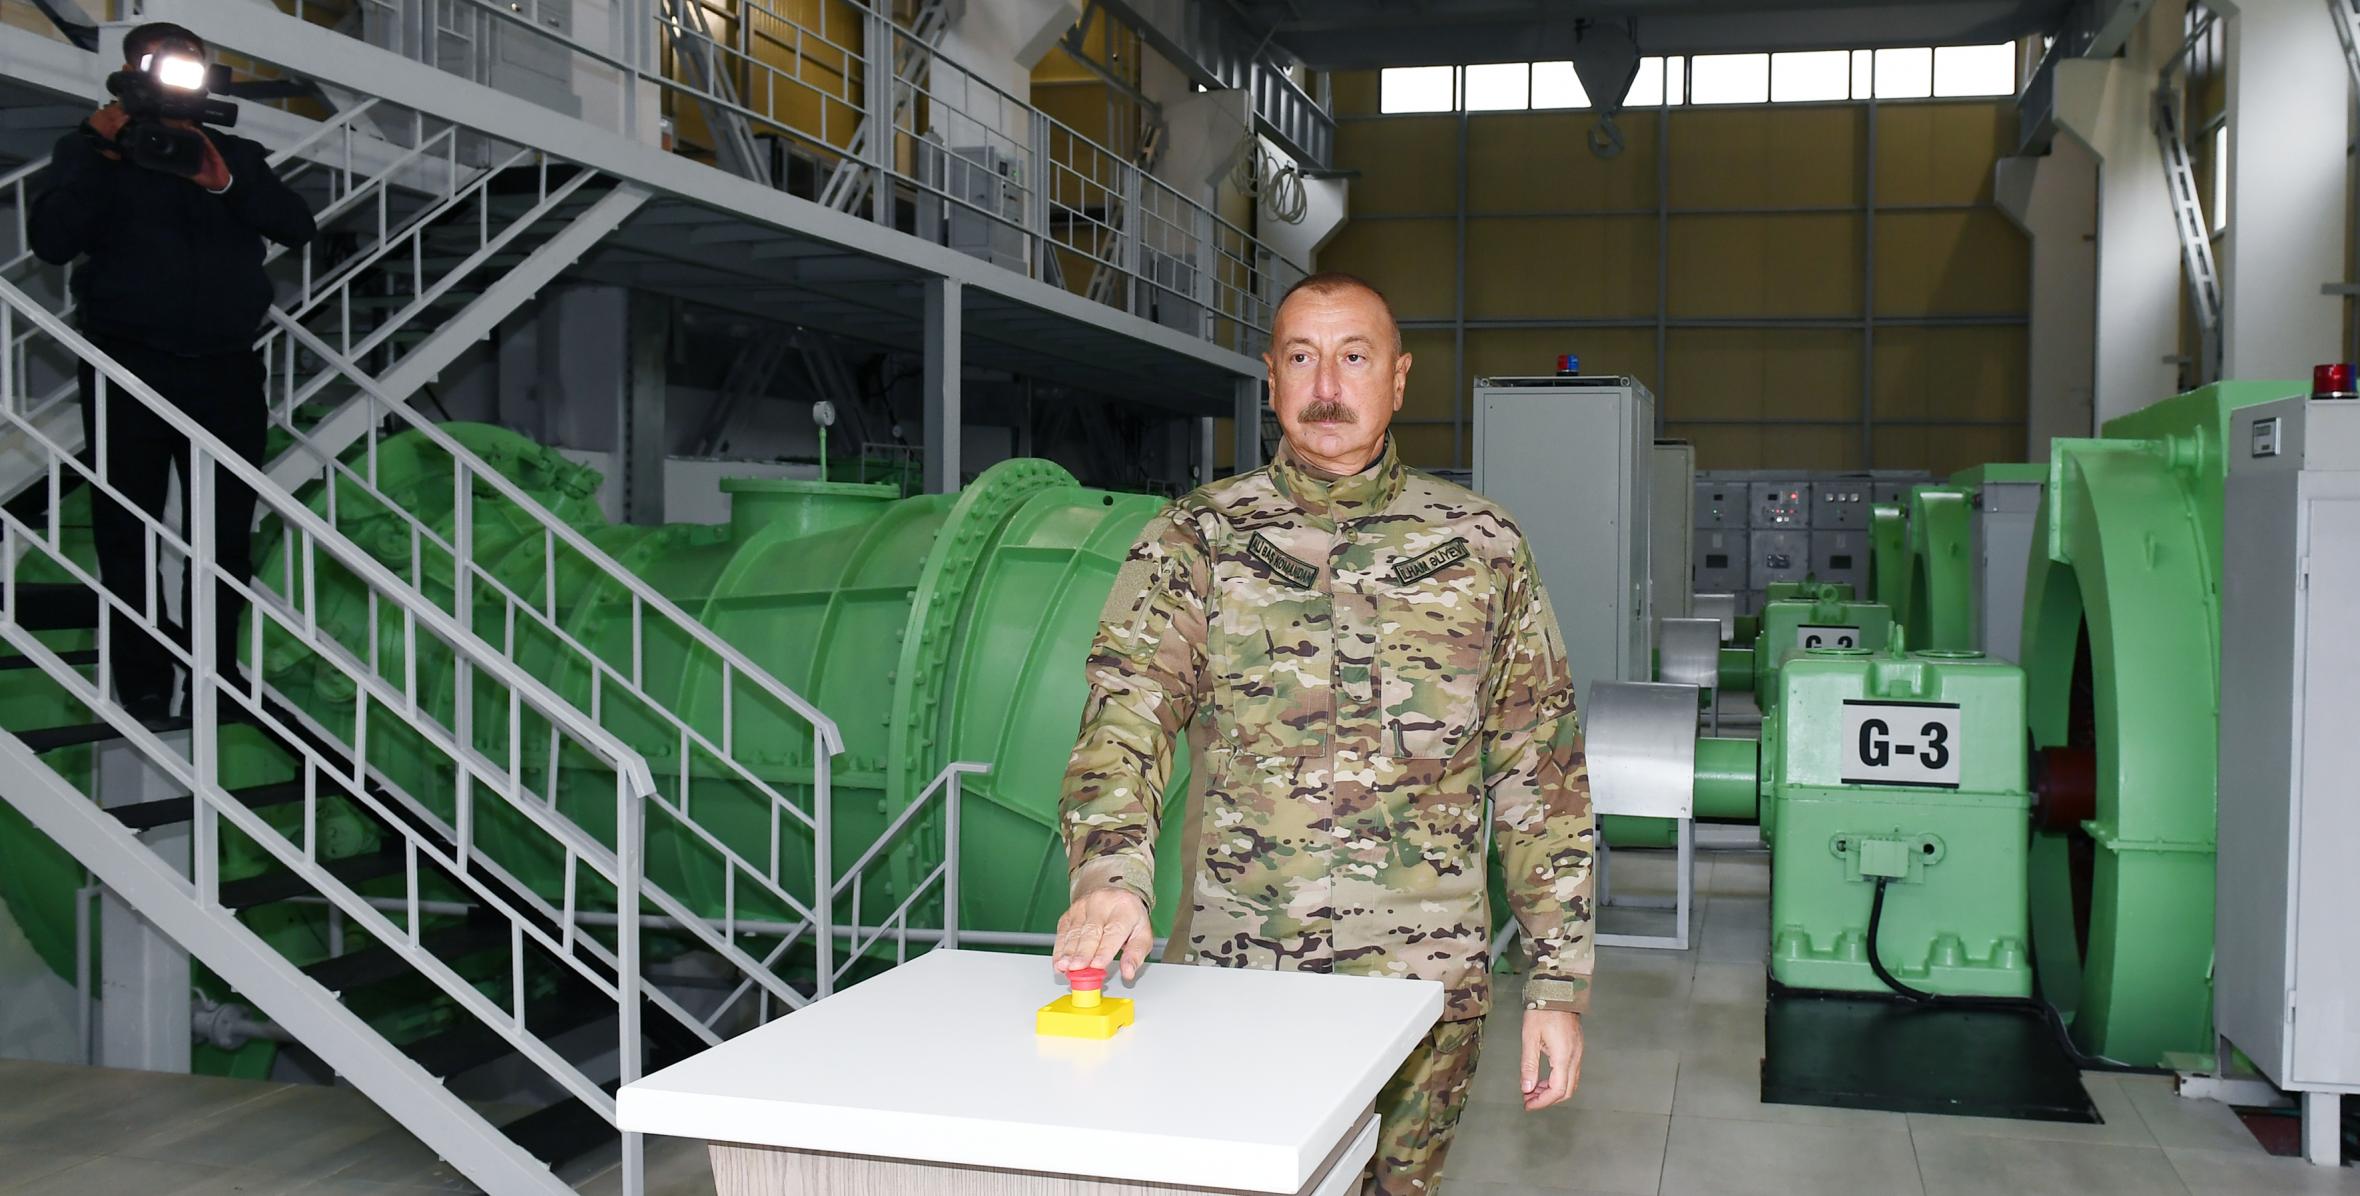 Ilham Aliyev launches “Sugovushan-1” and “Sugovushan-2” small hydropower plants after renovation